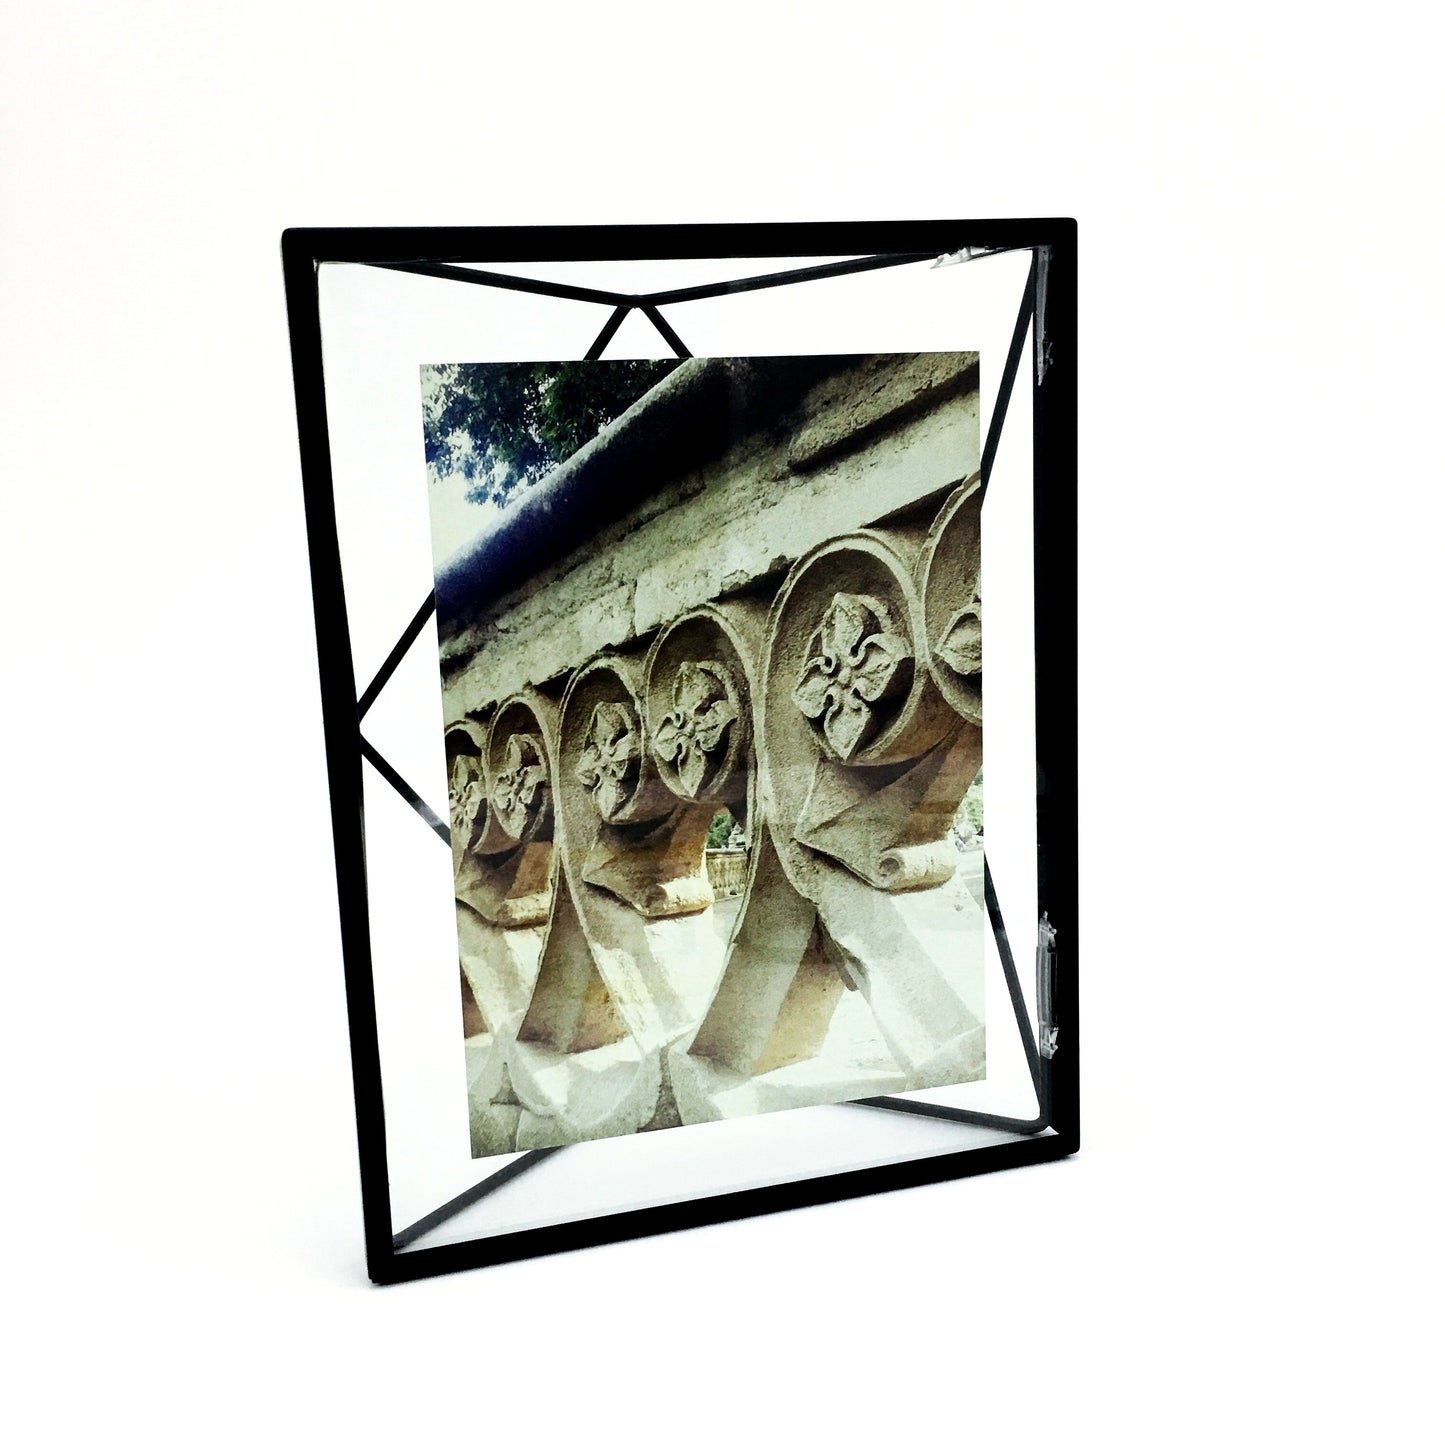 "Prisma" Picture Frames in Black by Umbra - 5 x 7 inches by Umbra - K. A. Artist Shop